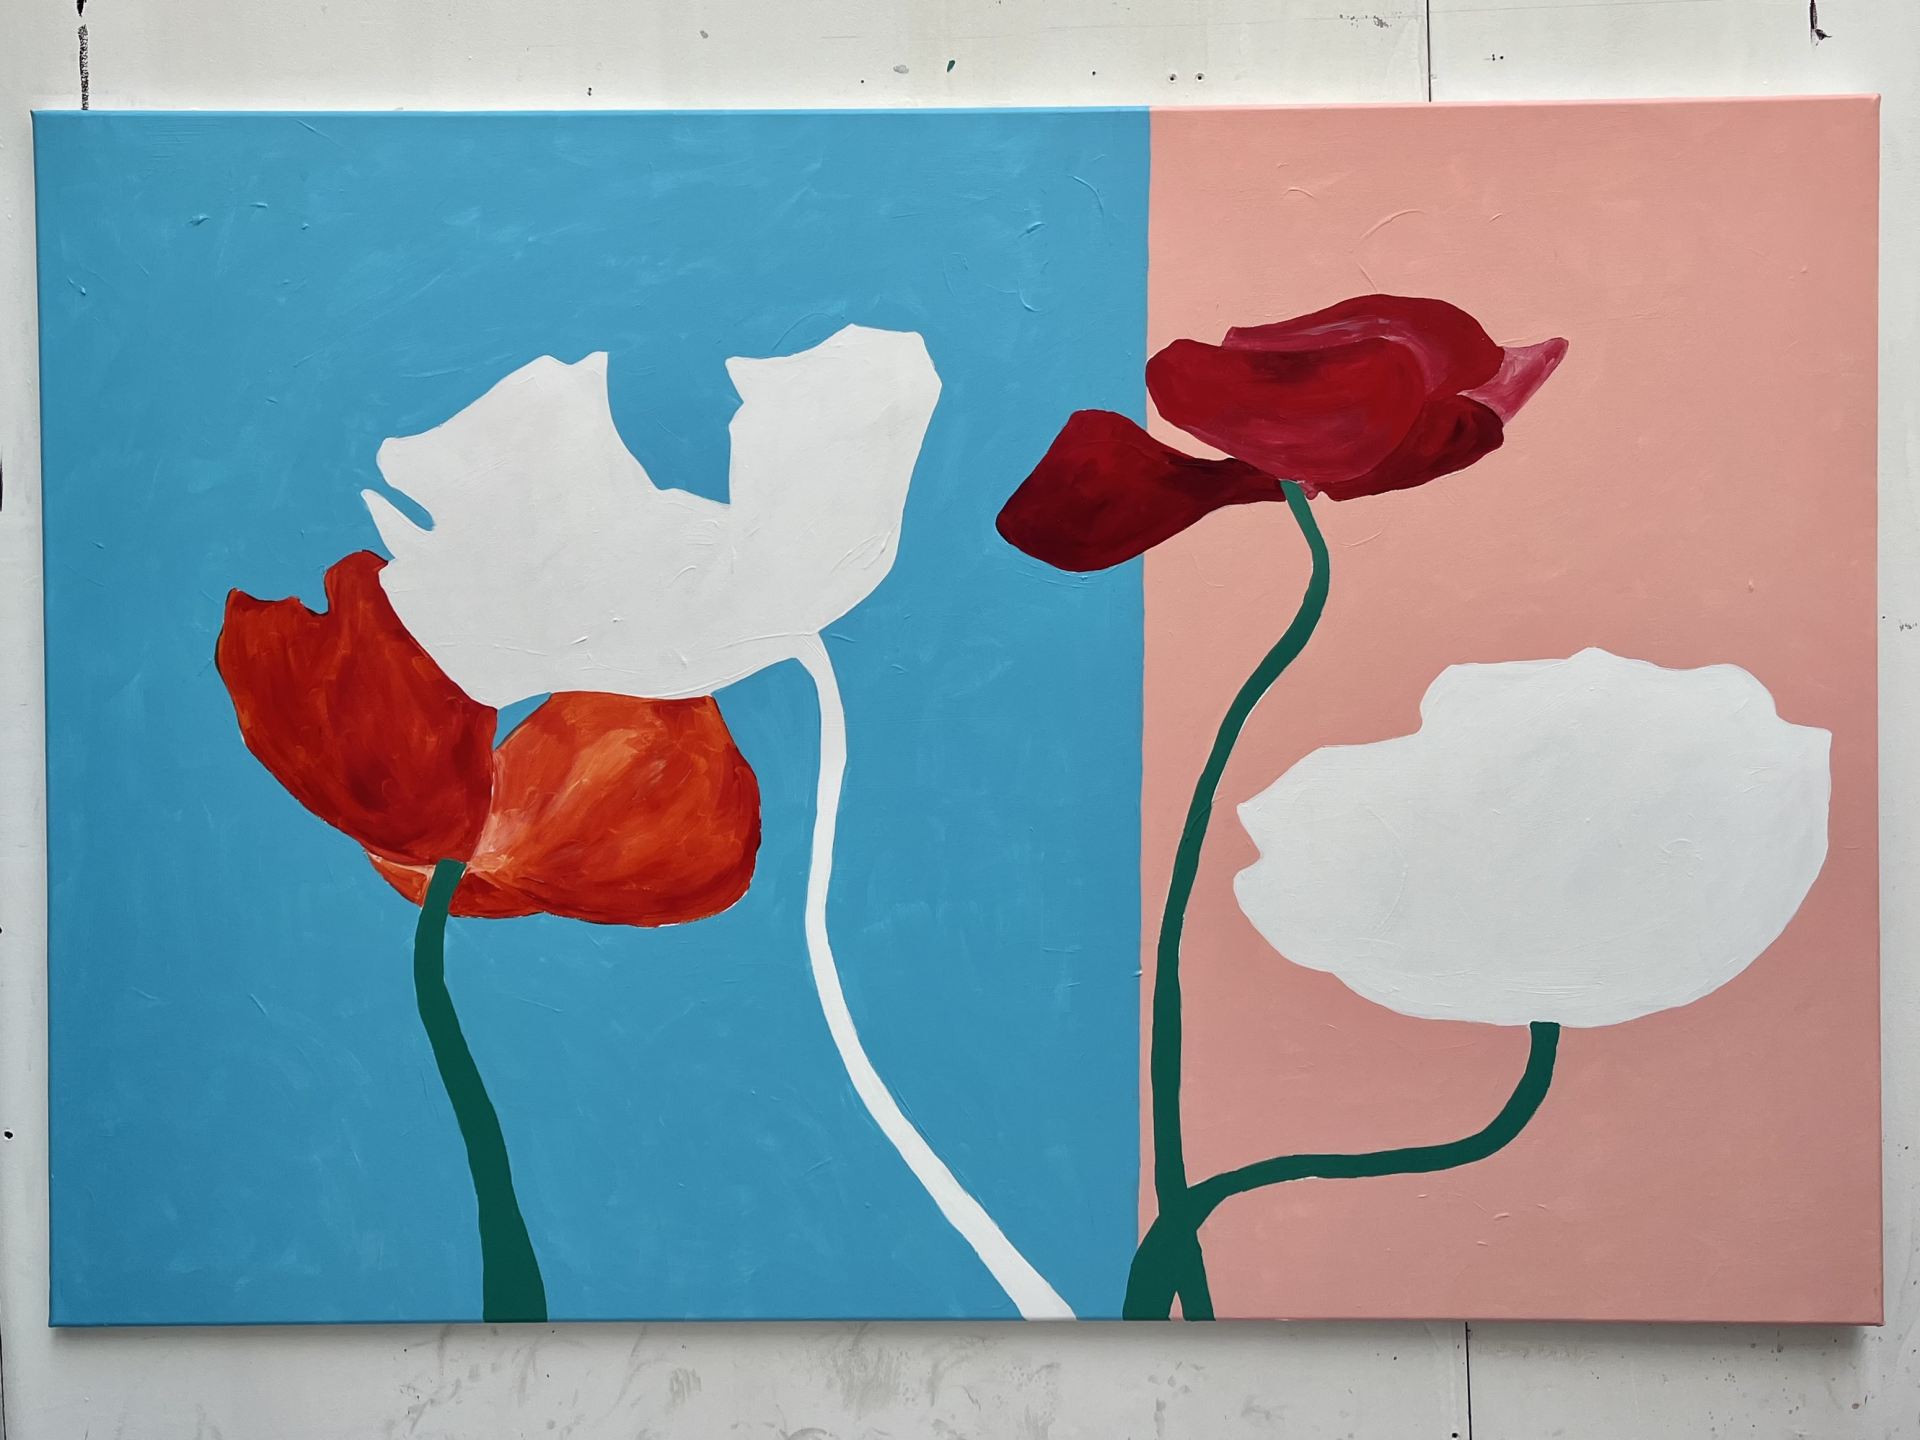 A painting of red and white flowers, against a white wall.